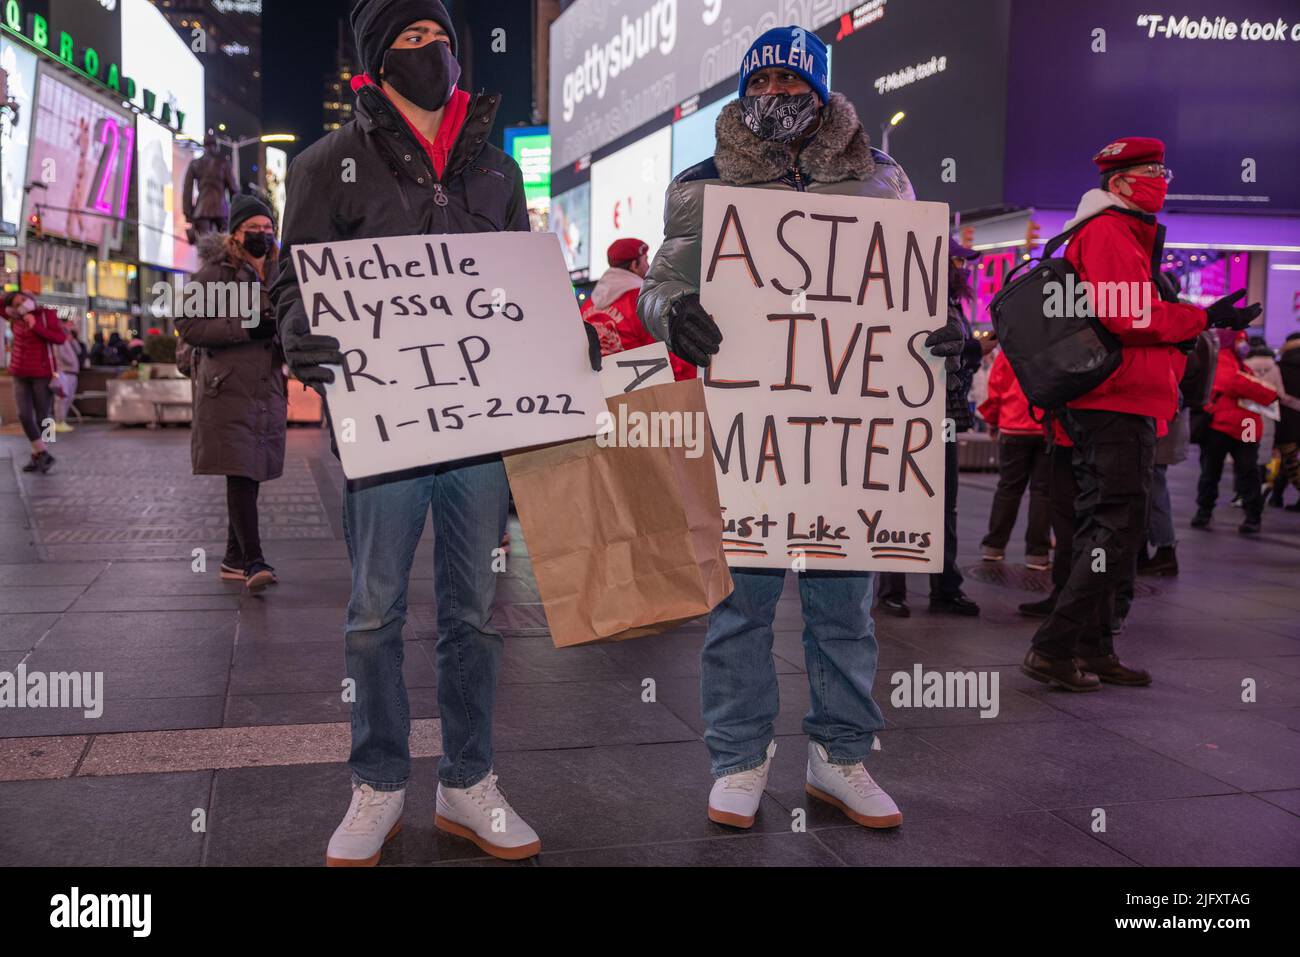 NEW YORK, N.Y. – January 18, 2022: People participate in a Times Square vigil for subway attack victim Michelle Alyssa Go. Stock Photo